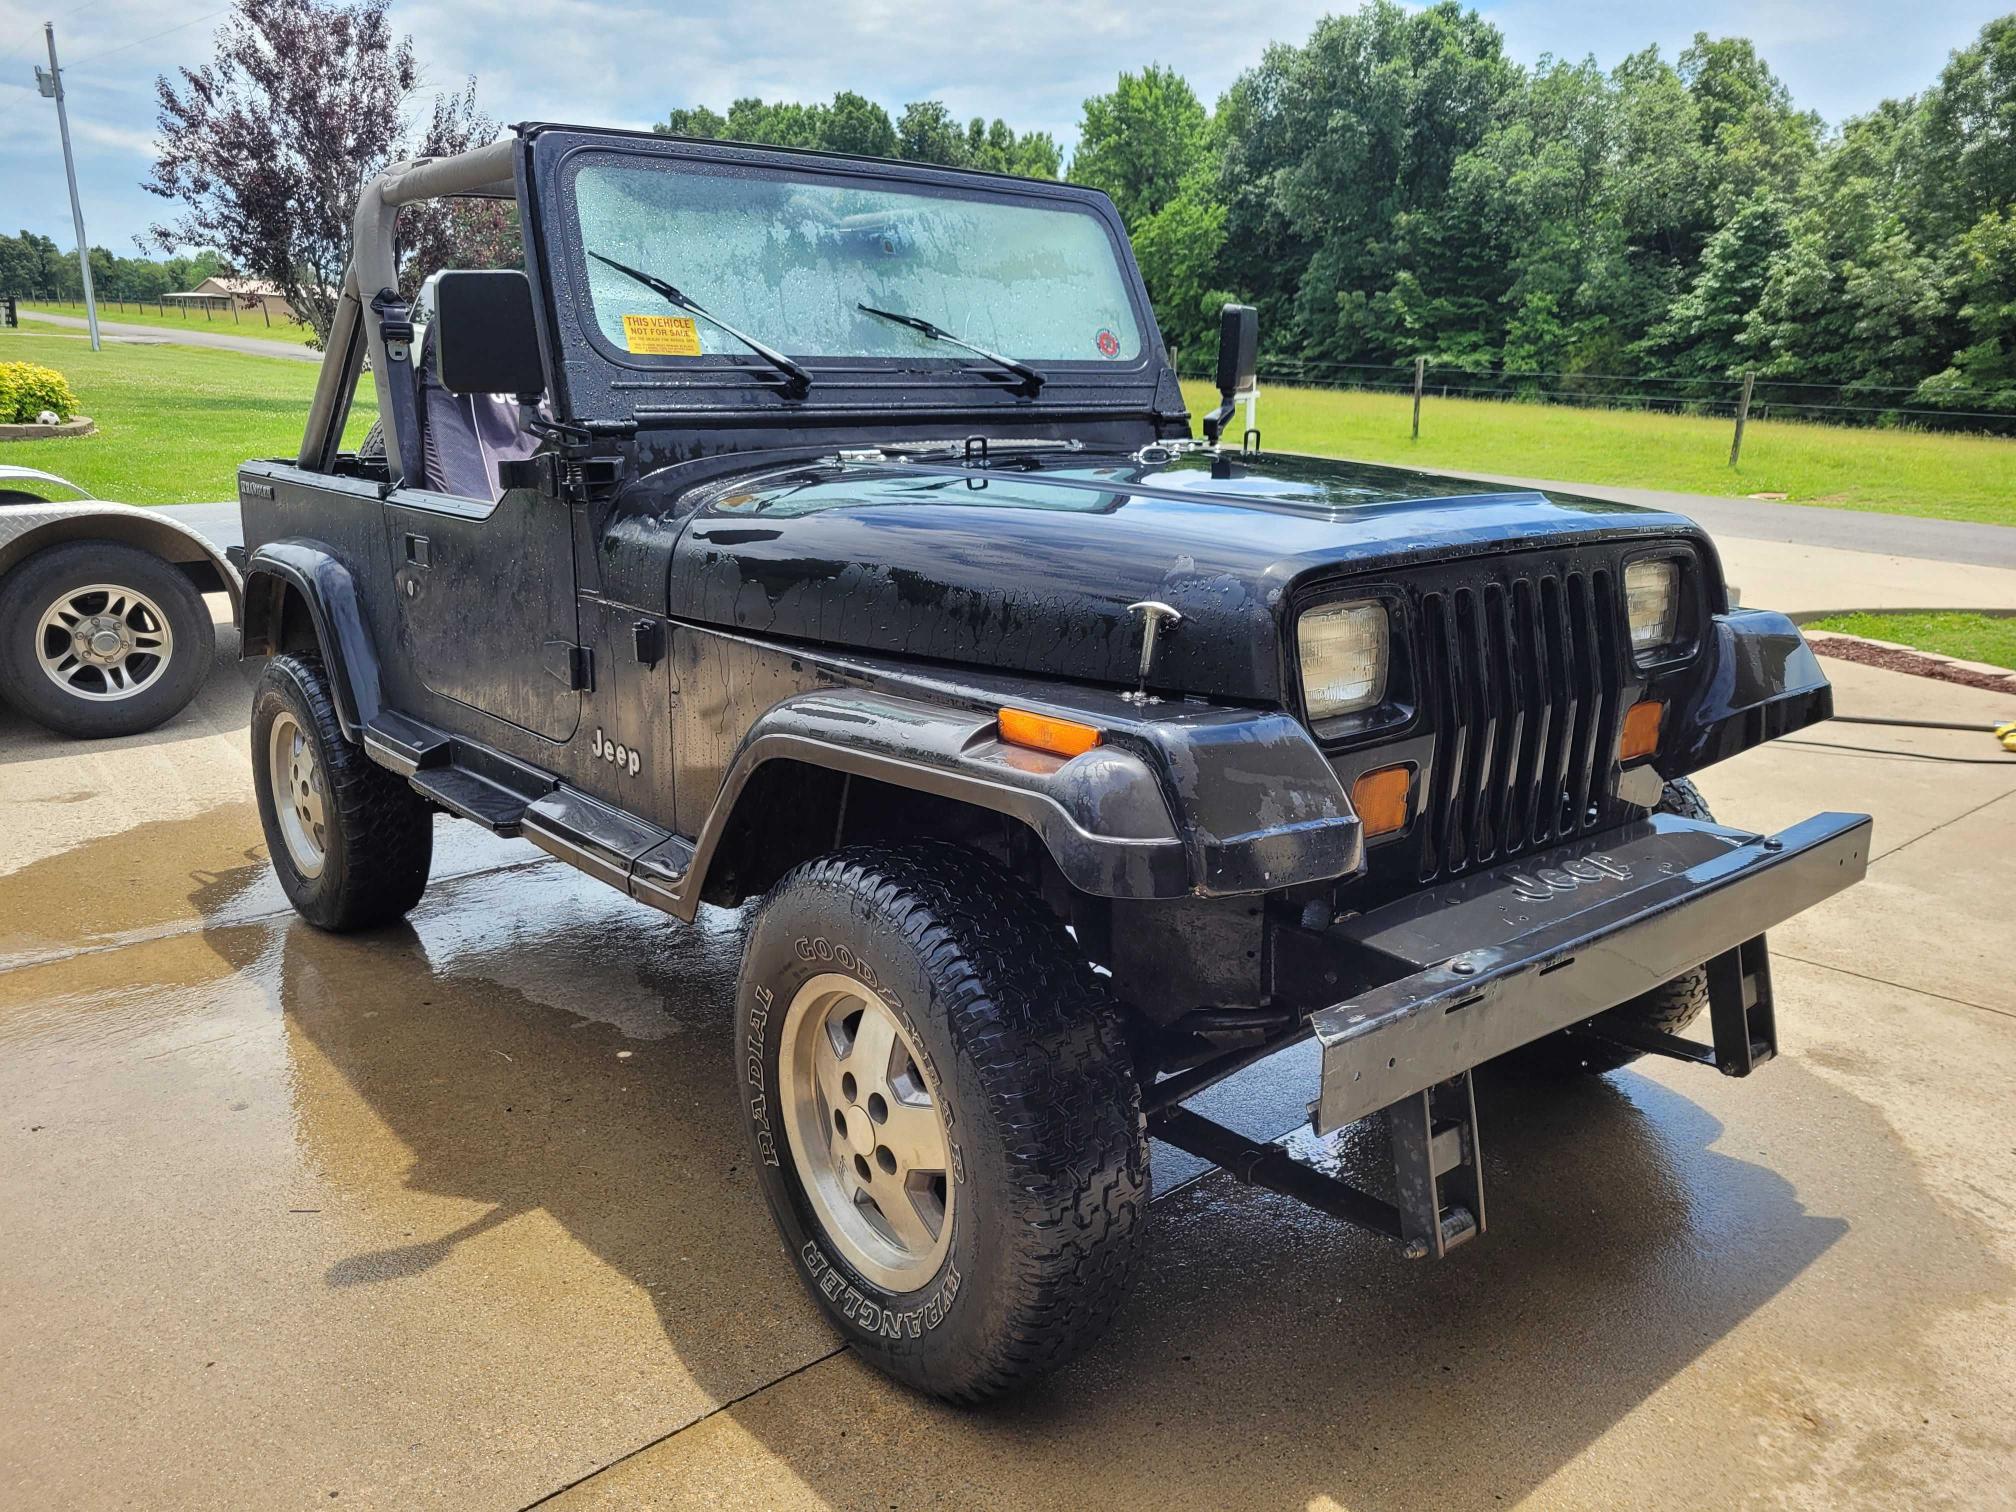 1989 JEEP WRANGLER / YJ for Sale | TN - NASHVILLE | Sat. Jul 17, 2021 -  Used & Repairable Salvage Cars - Copart USA